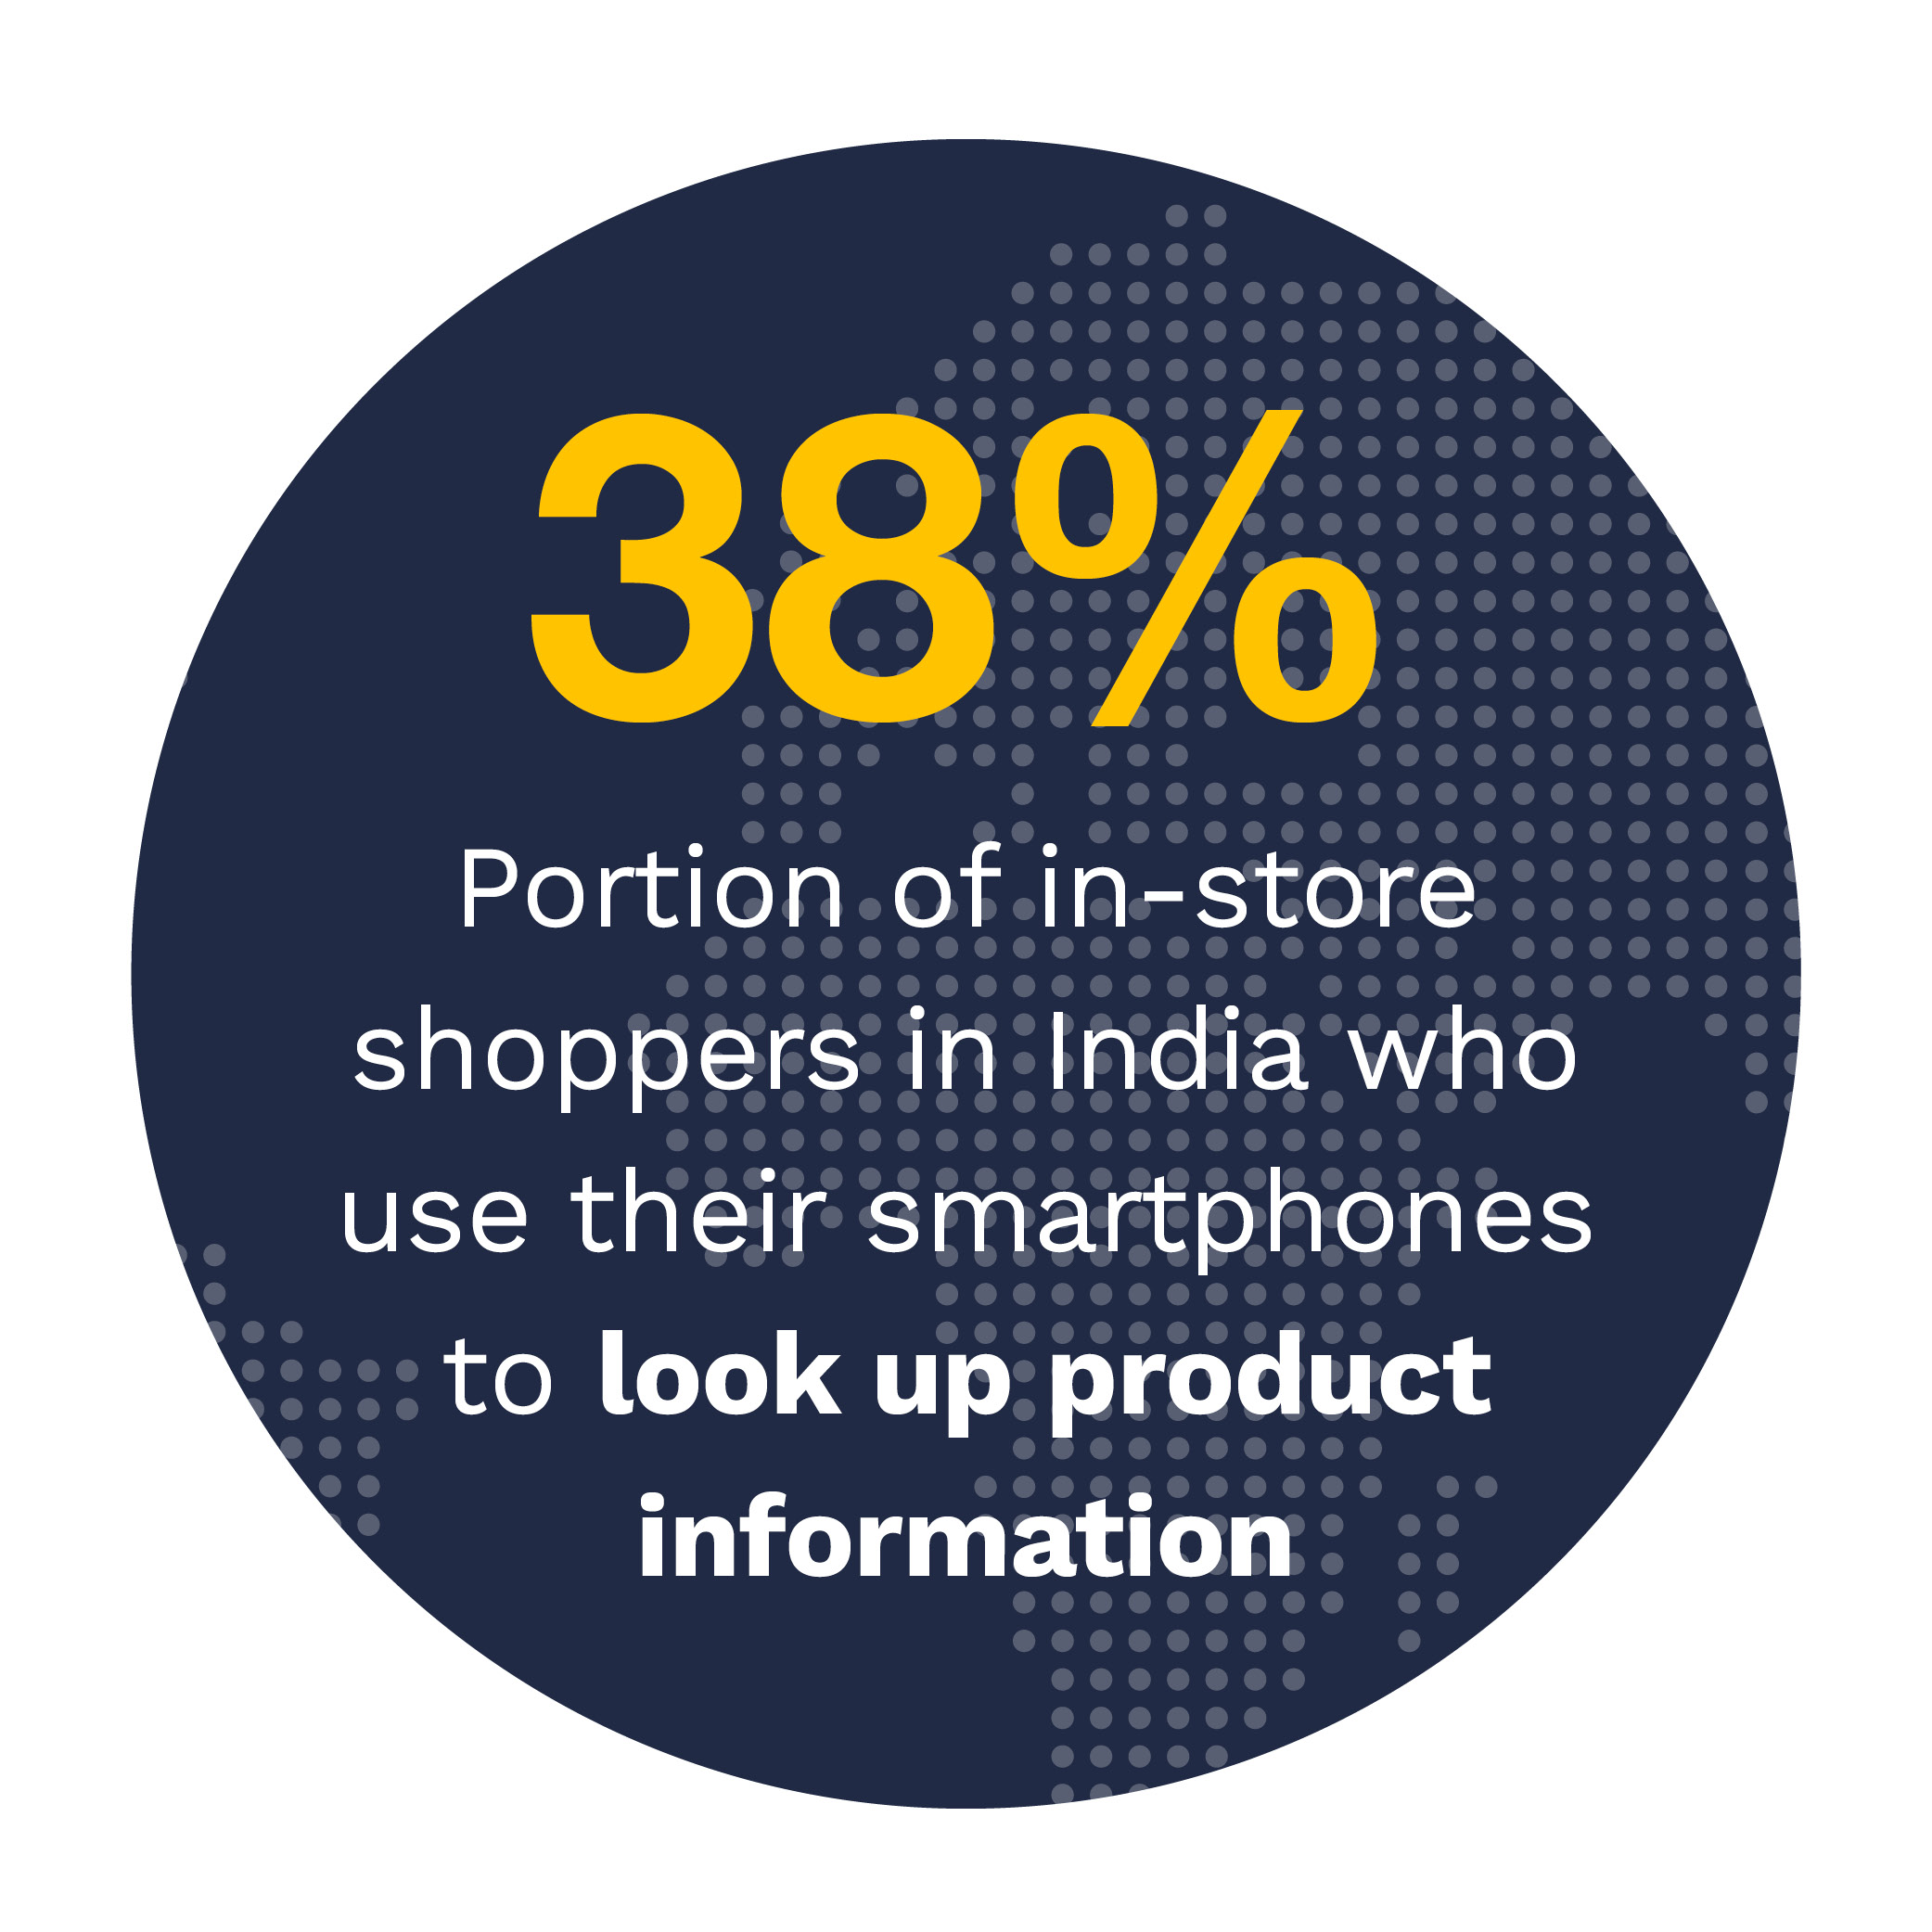 38%: Portion of in-store shoppers in India who use their smartphones to look up product information